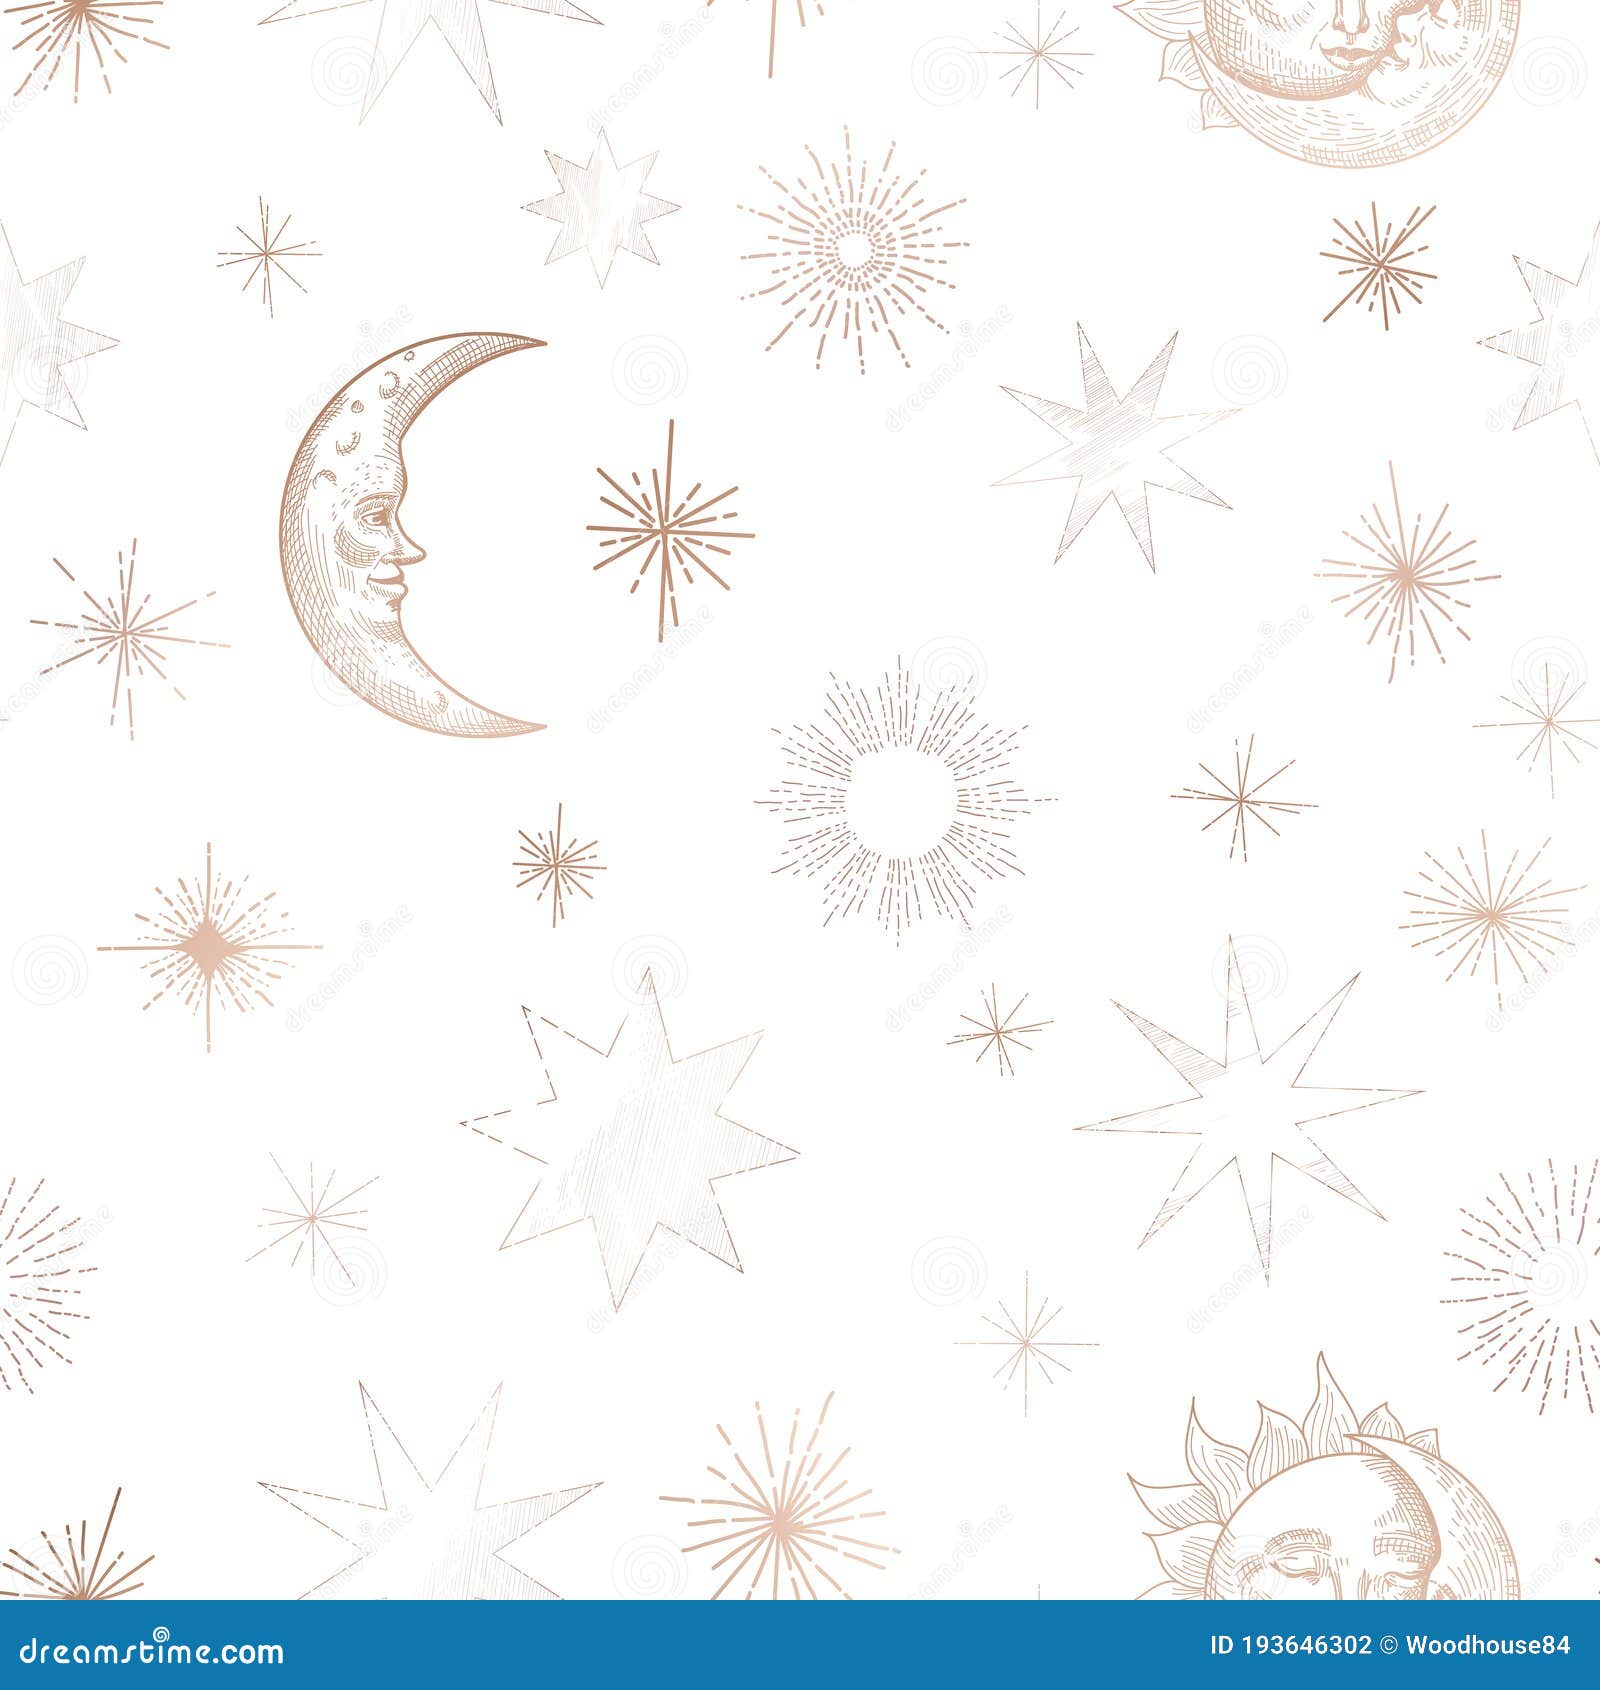 starry night sky trendy seamless pattern, vintage celestial hand drawn background template of galaxy, space, moon